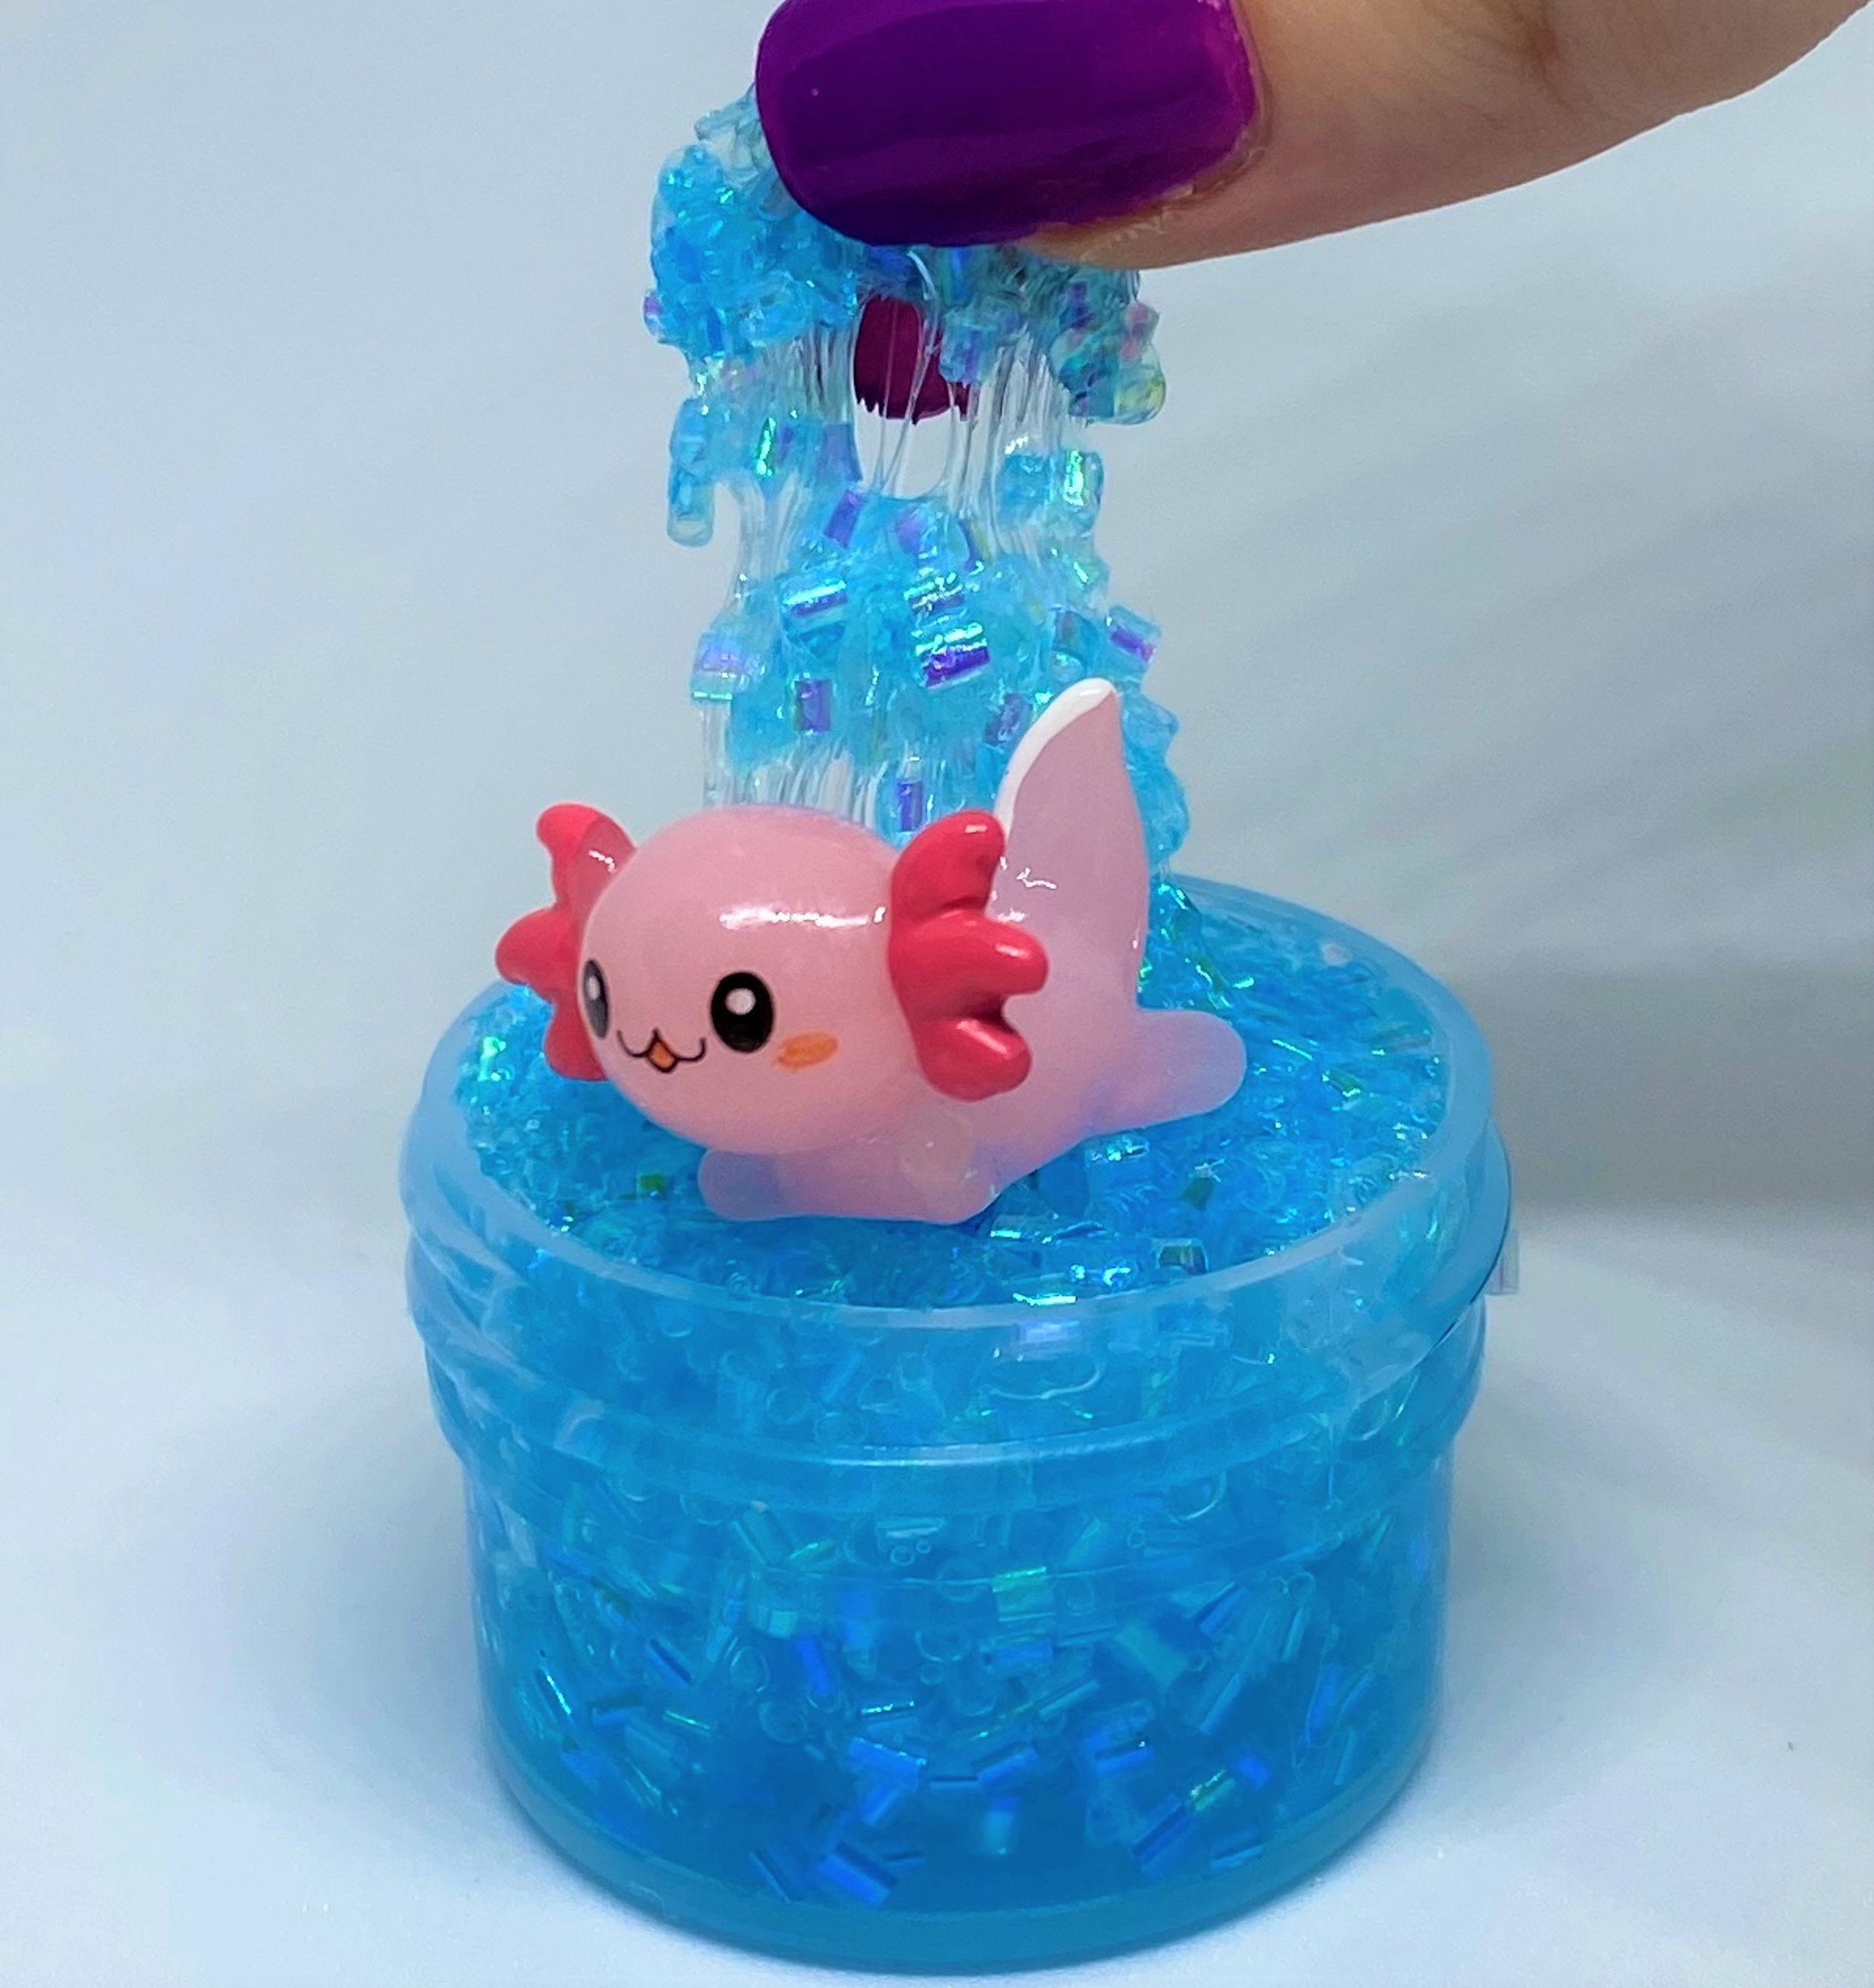 What other axolotl themed slime should we make?🤔 if you want a Peachy, Peachyslime